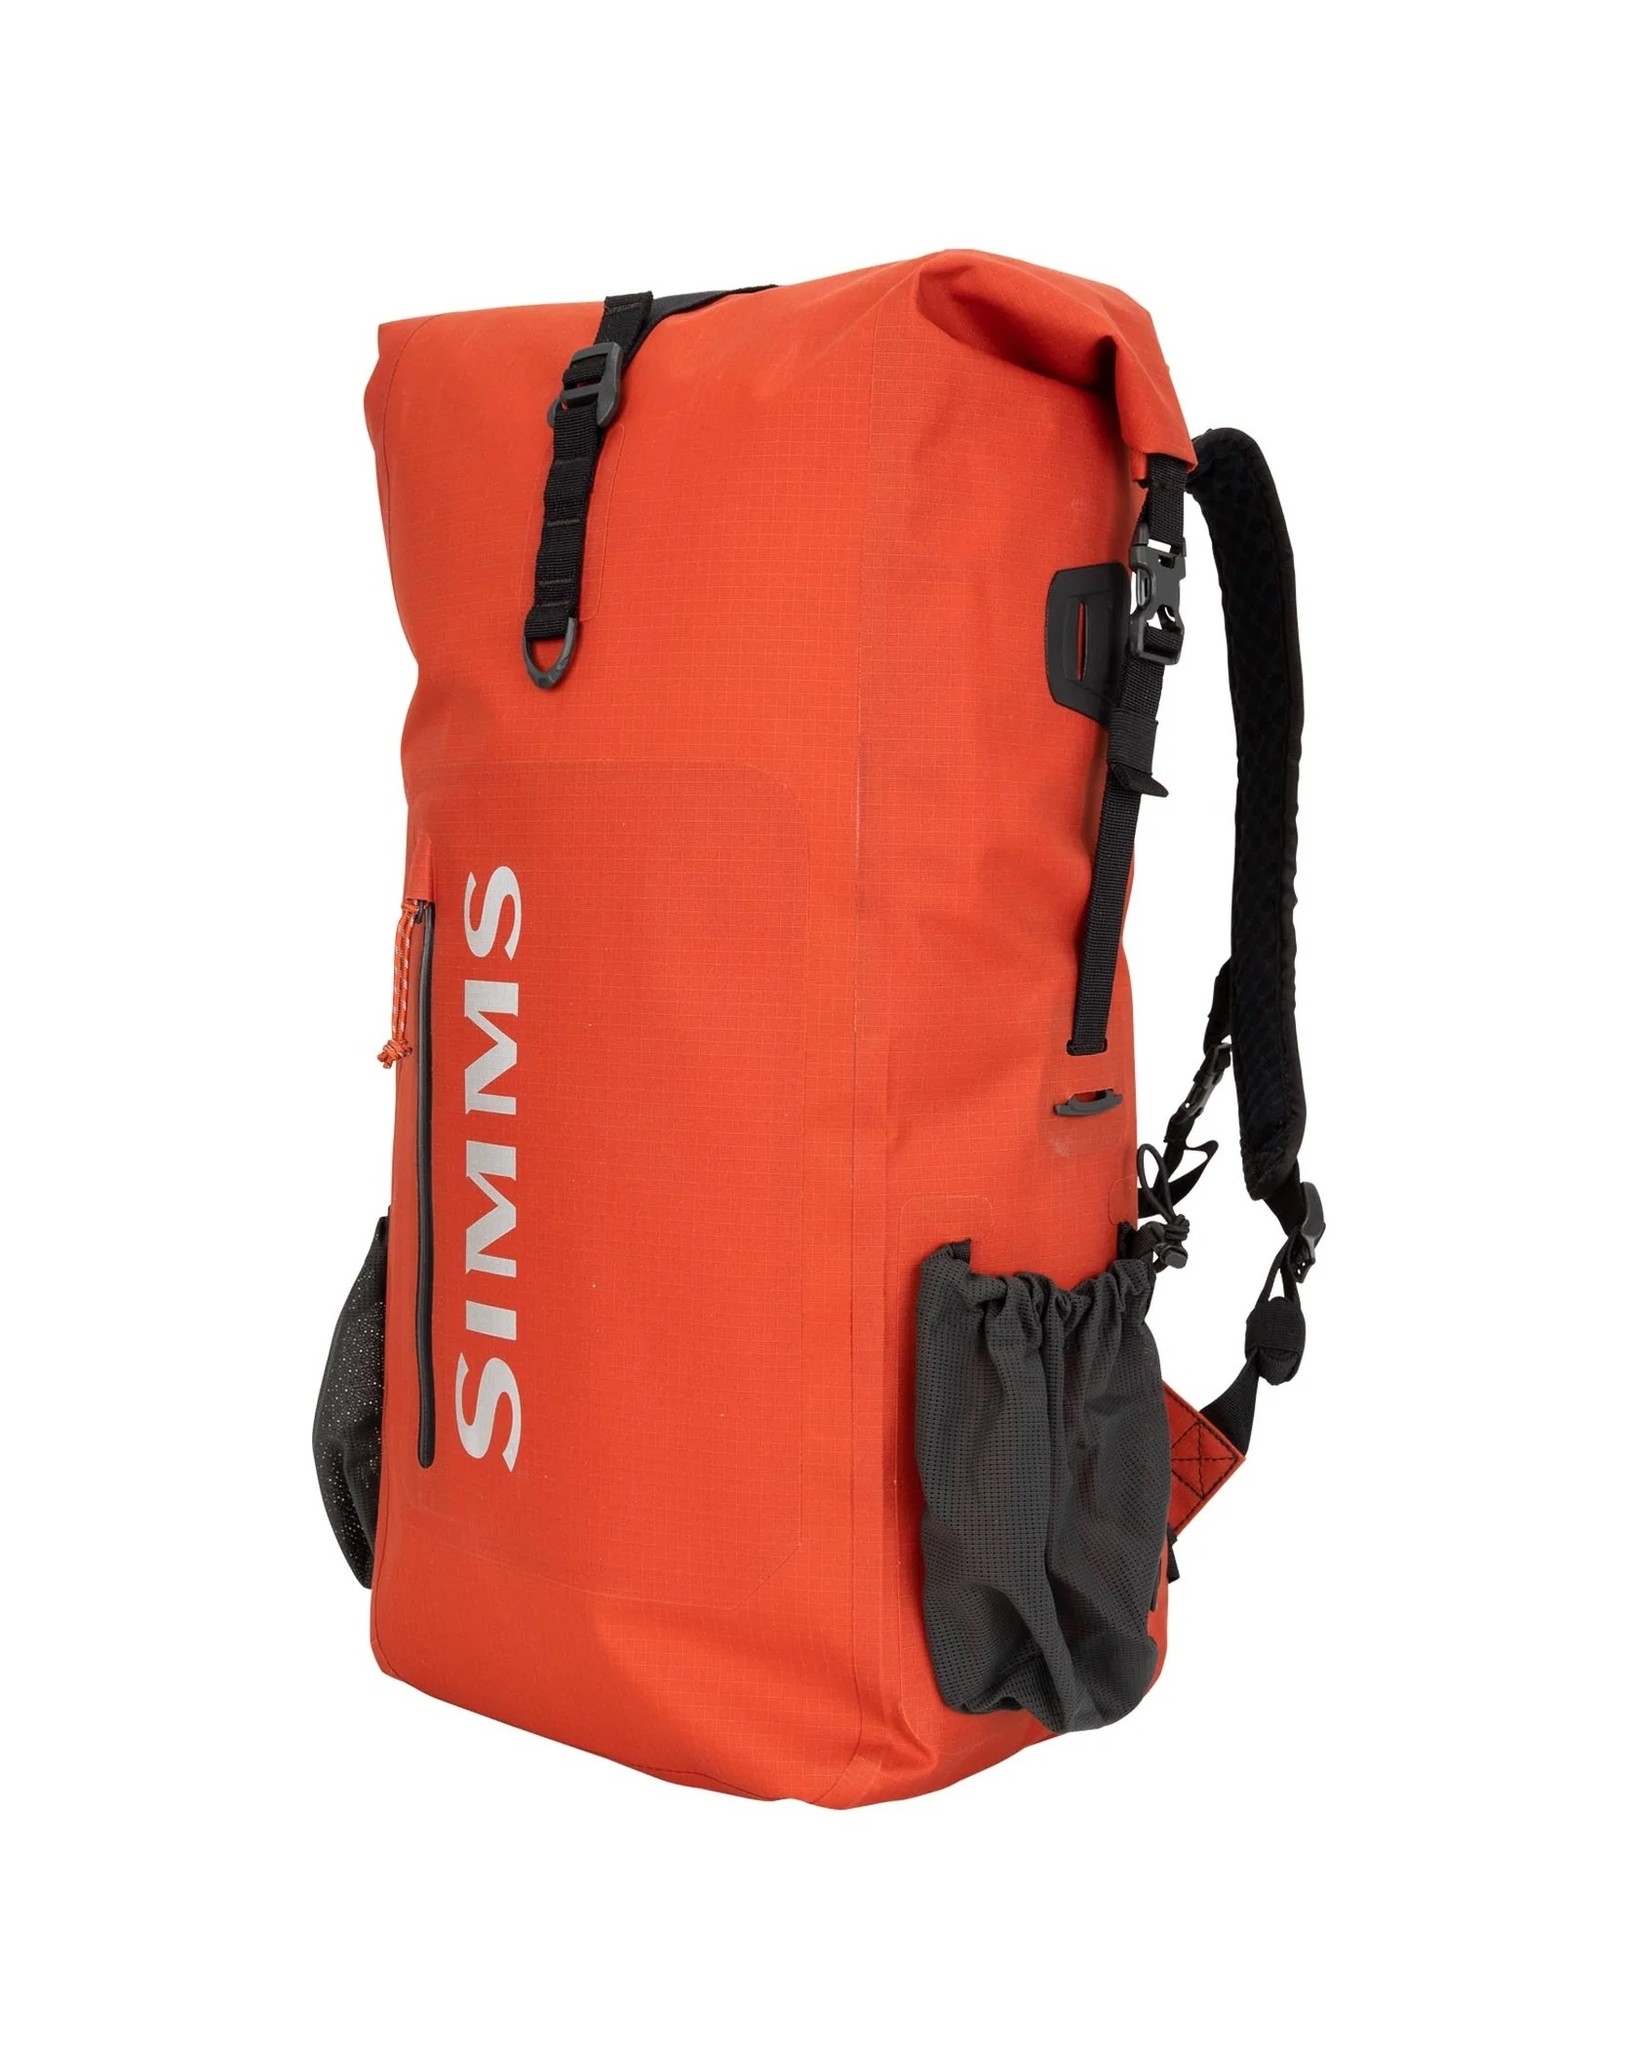 Simms Dry Creek Roll top Backpack - Simms Orange - RIGS Fly Shop